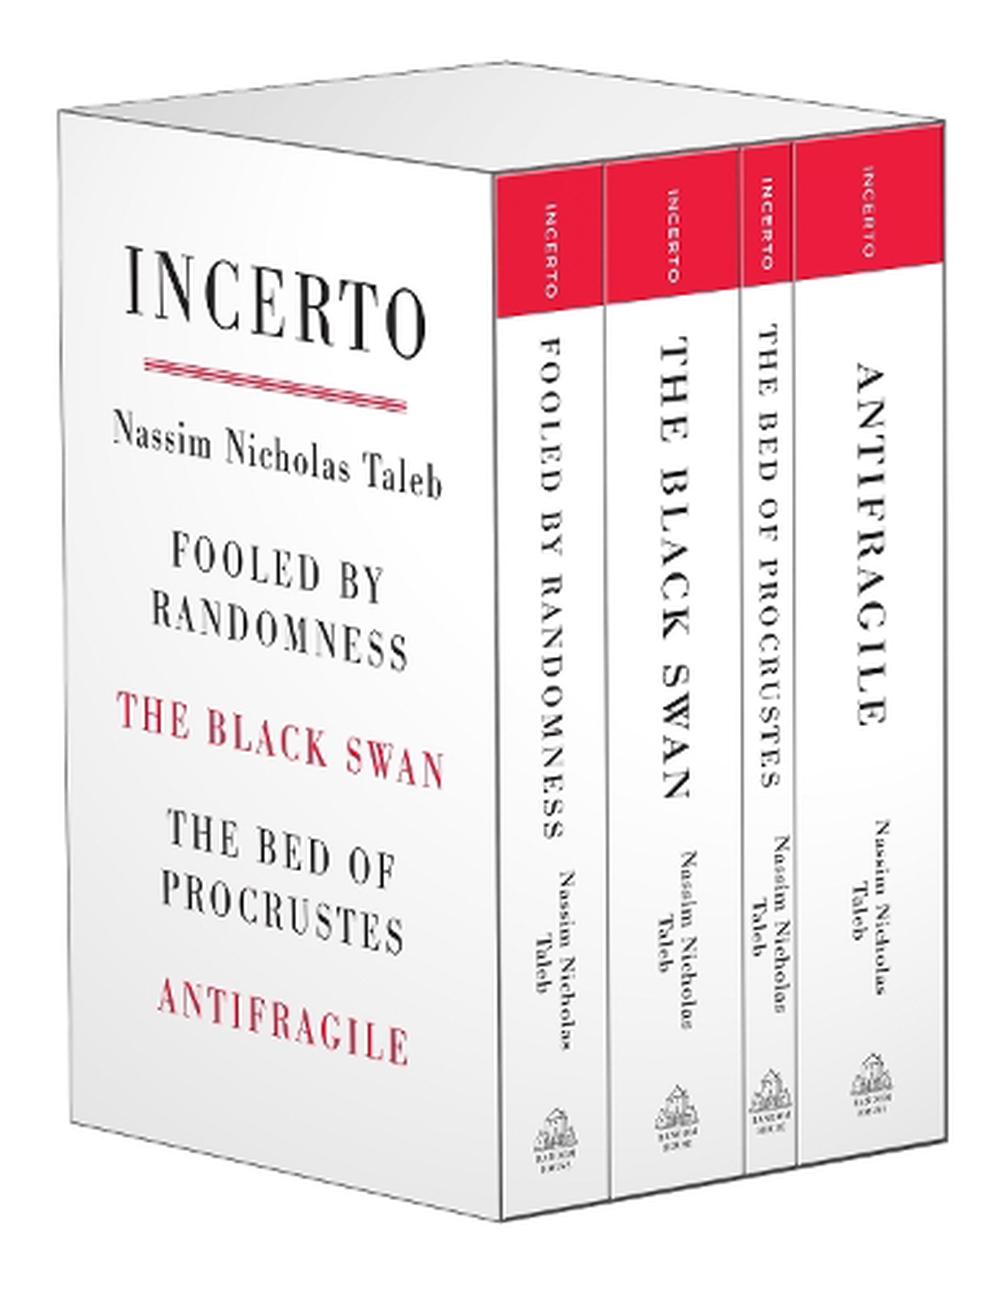 Incerto Fooled by Randomness The Black Swan The Bed of Procrustes
Antifragile Epub-Ebook